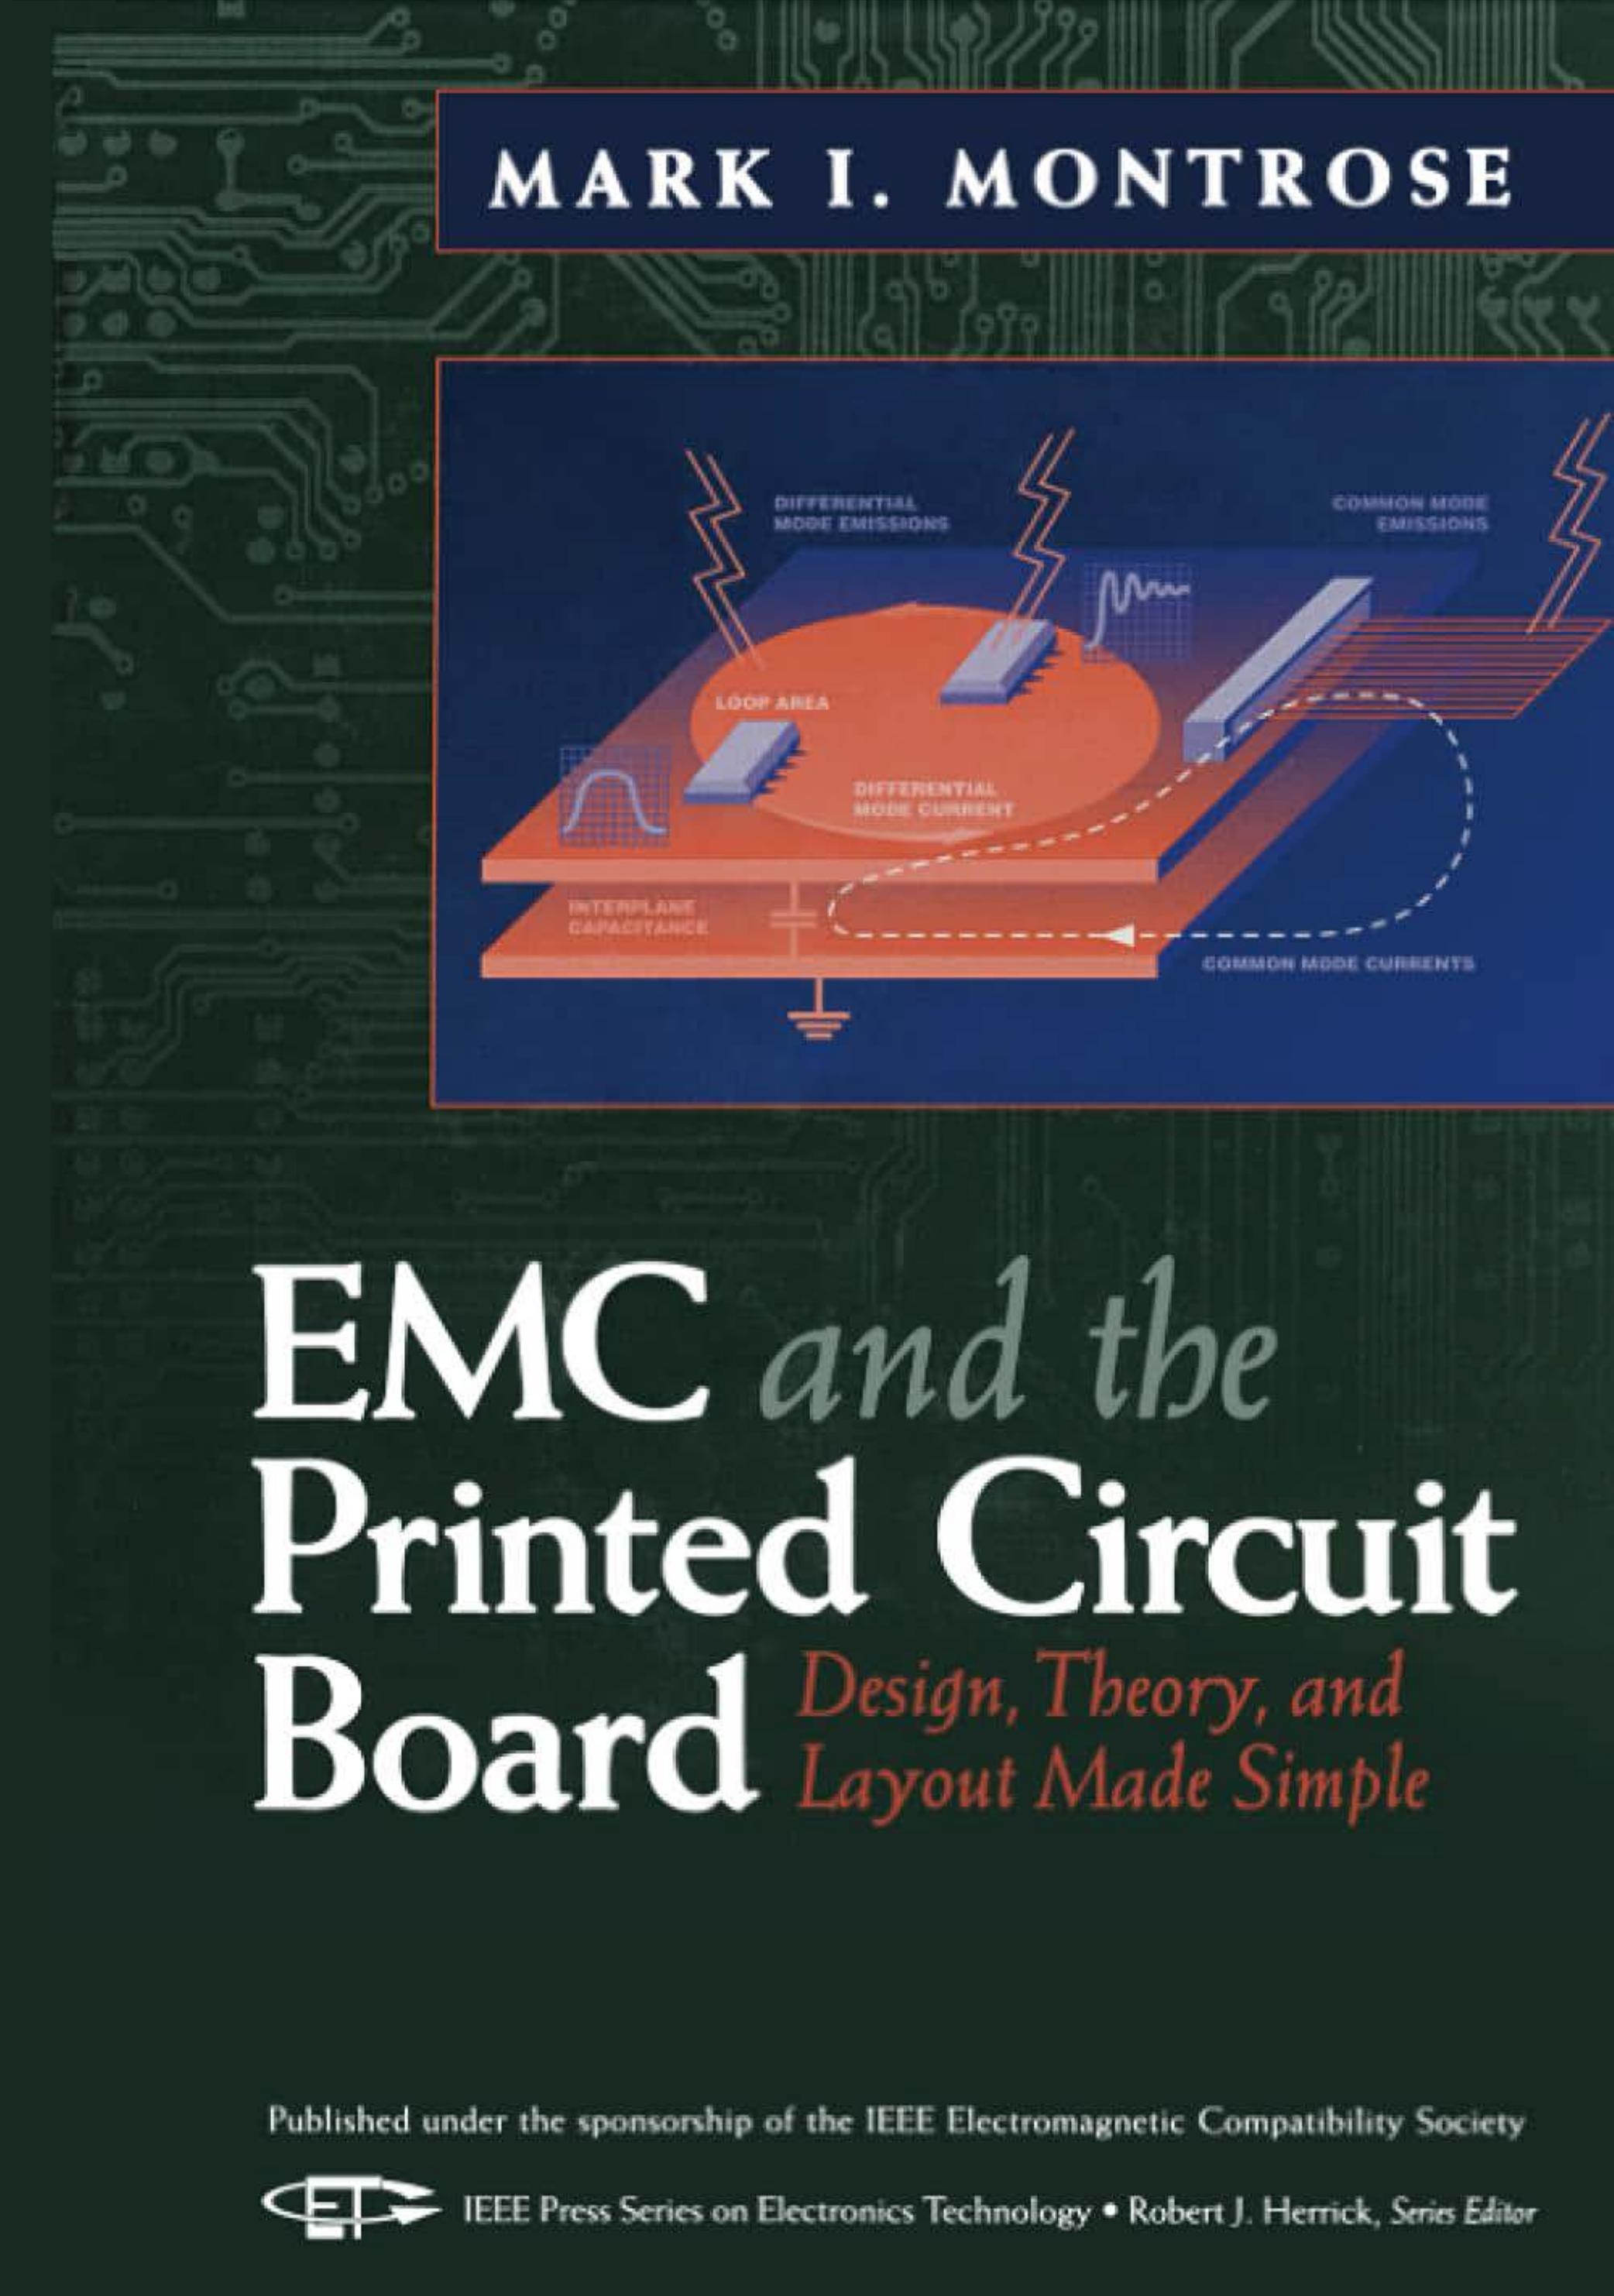 EMC and The Printed Circuit Board: Design, Theory and Layout Made Simple by Mark I. Montrose